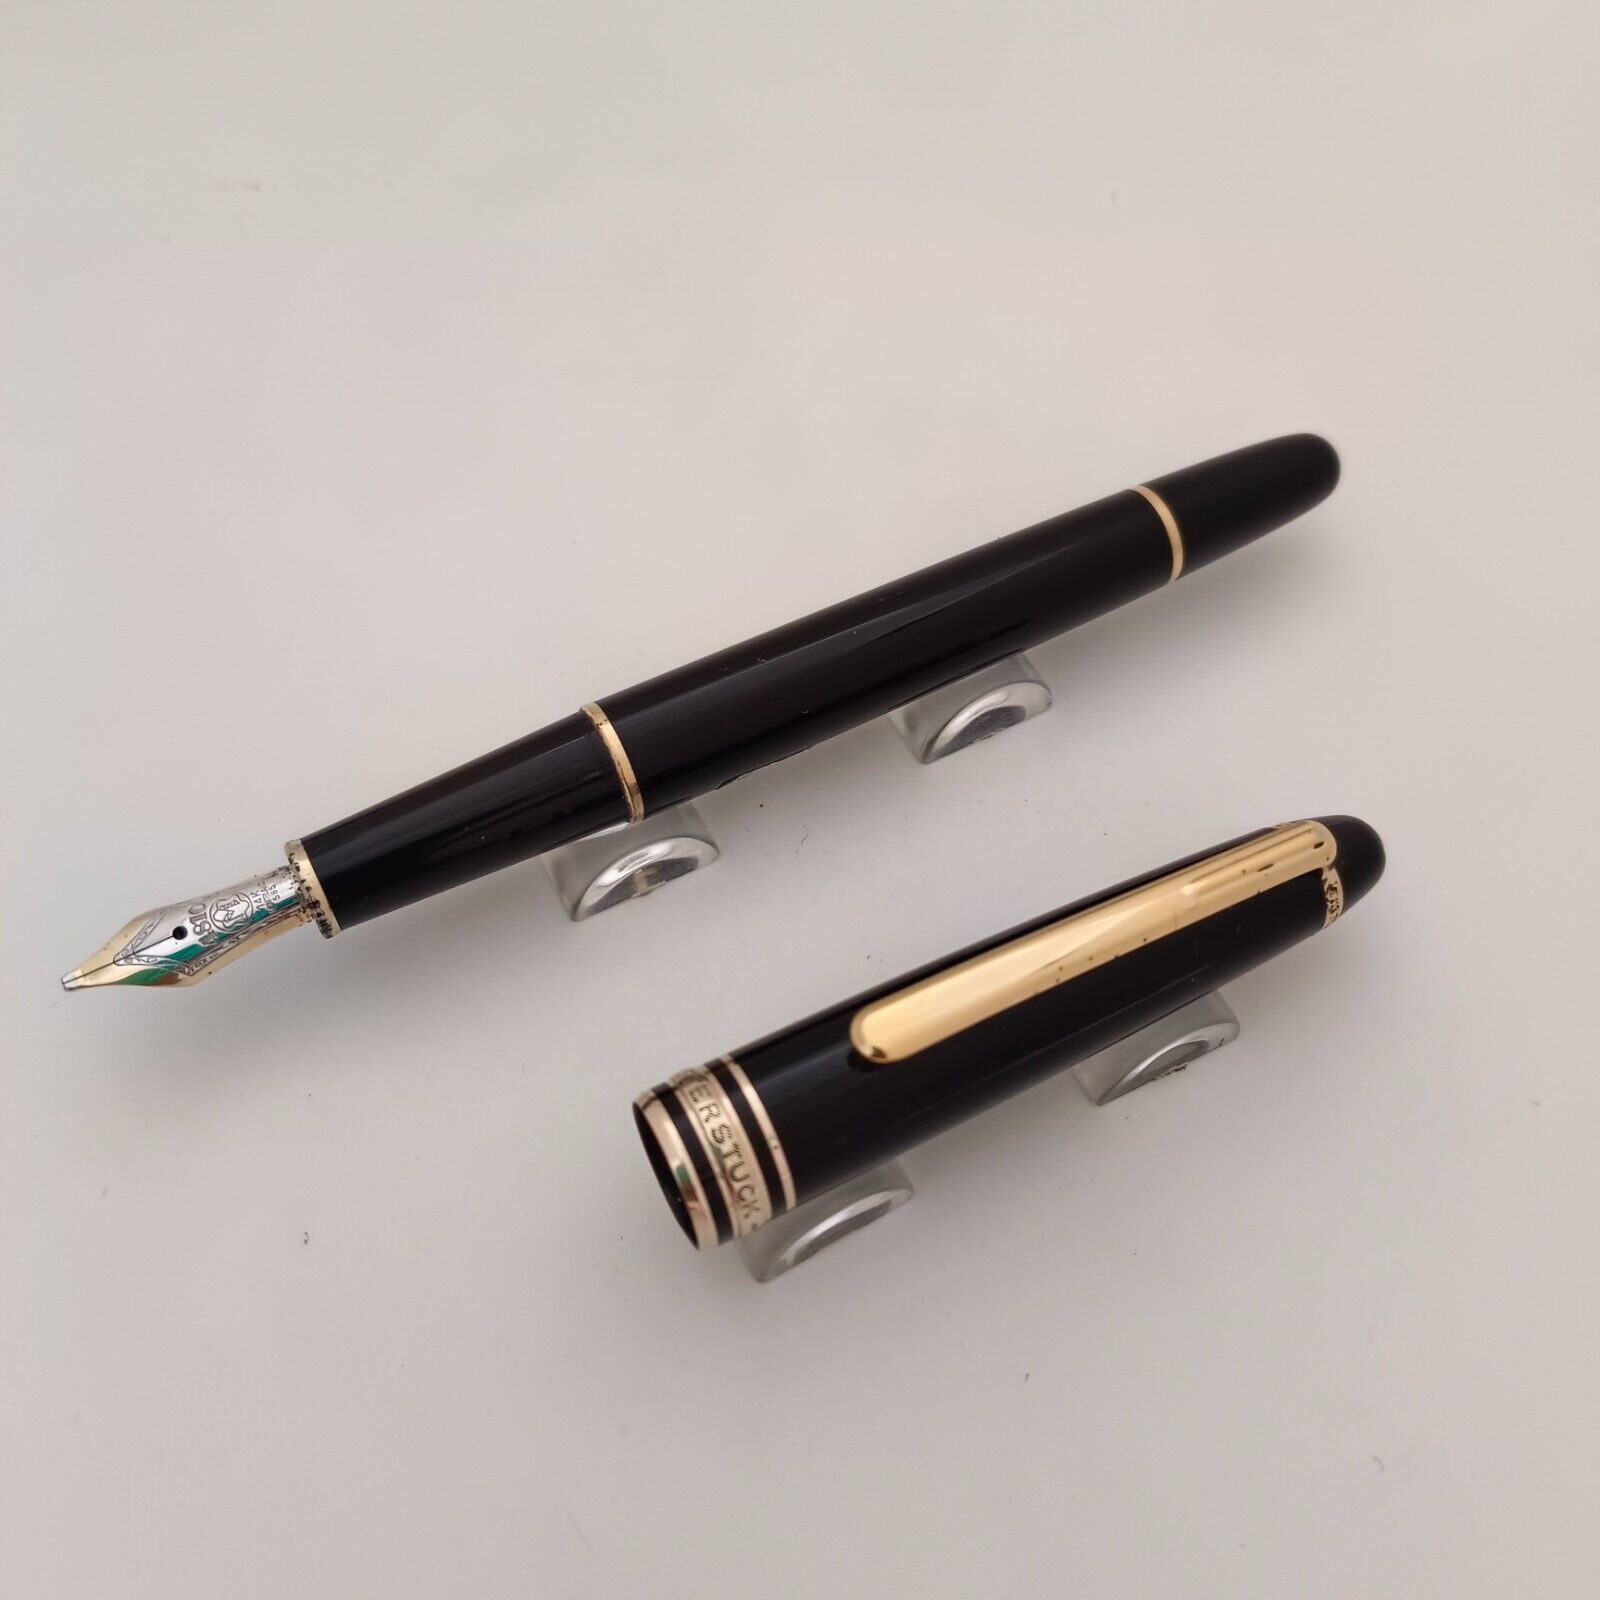 Montblanc meisterstuck 144 fountain pen, 14kt Gold Nib Made in Germany - £315.06 GBP